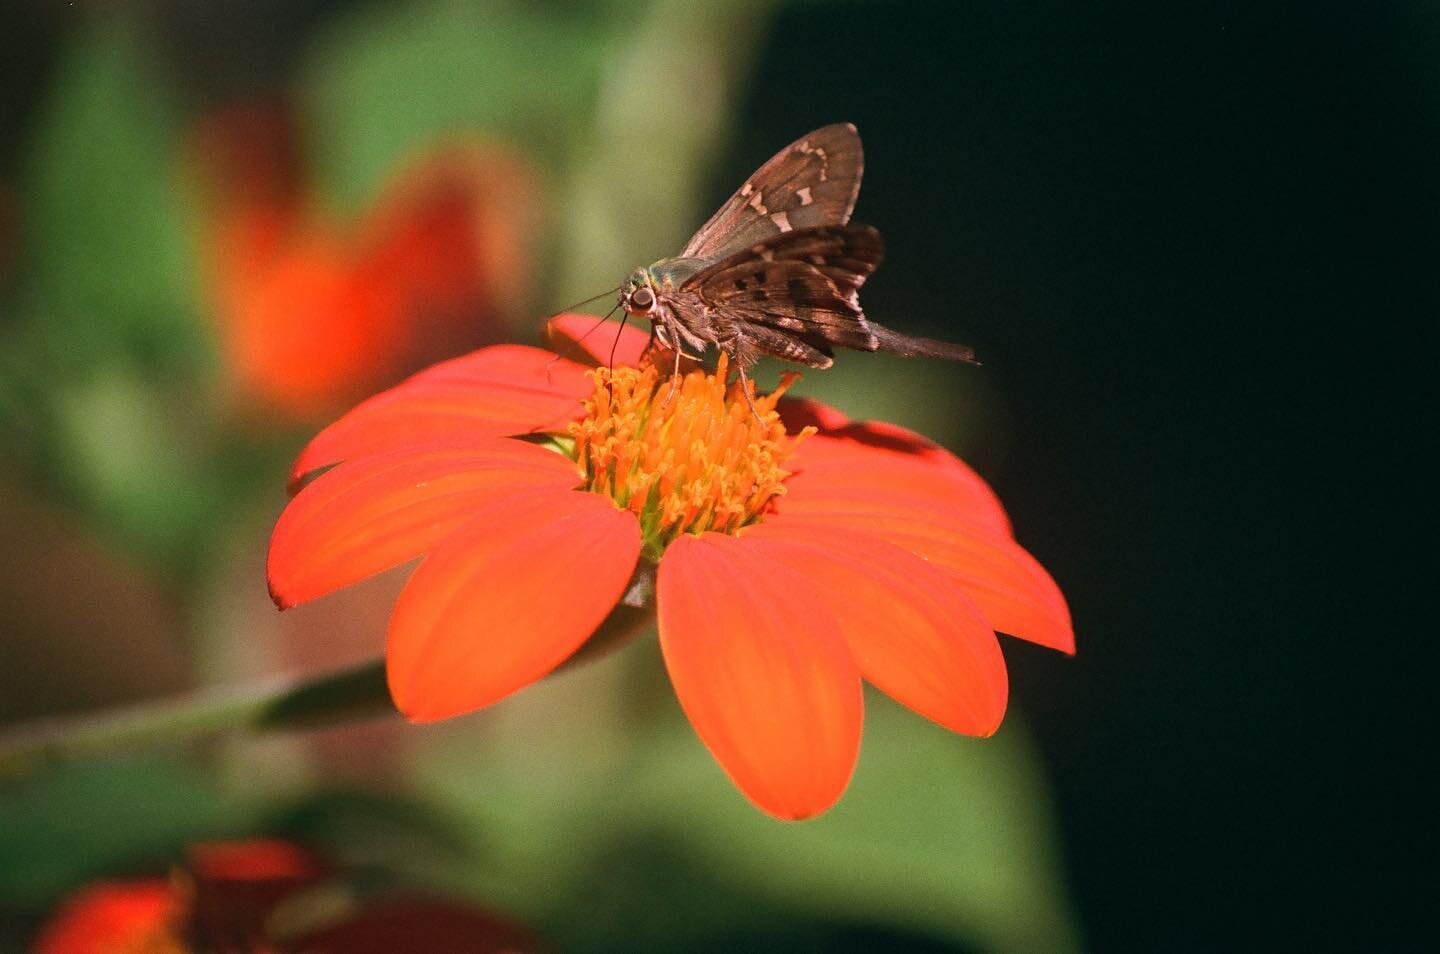 This summer I really enjoyed Louisiana Native Wildflowers in the yard that @bawluigi planted. They attract so many wonderful pollinators that brought a lot of joy to the backyard 🧡

#f4nikon #film #thedarkroomlab #louisianawildflowers